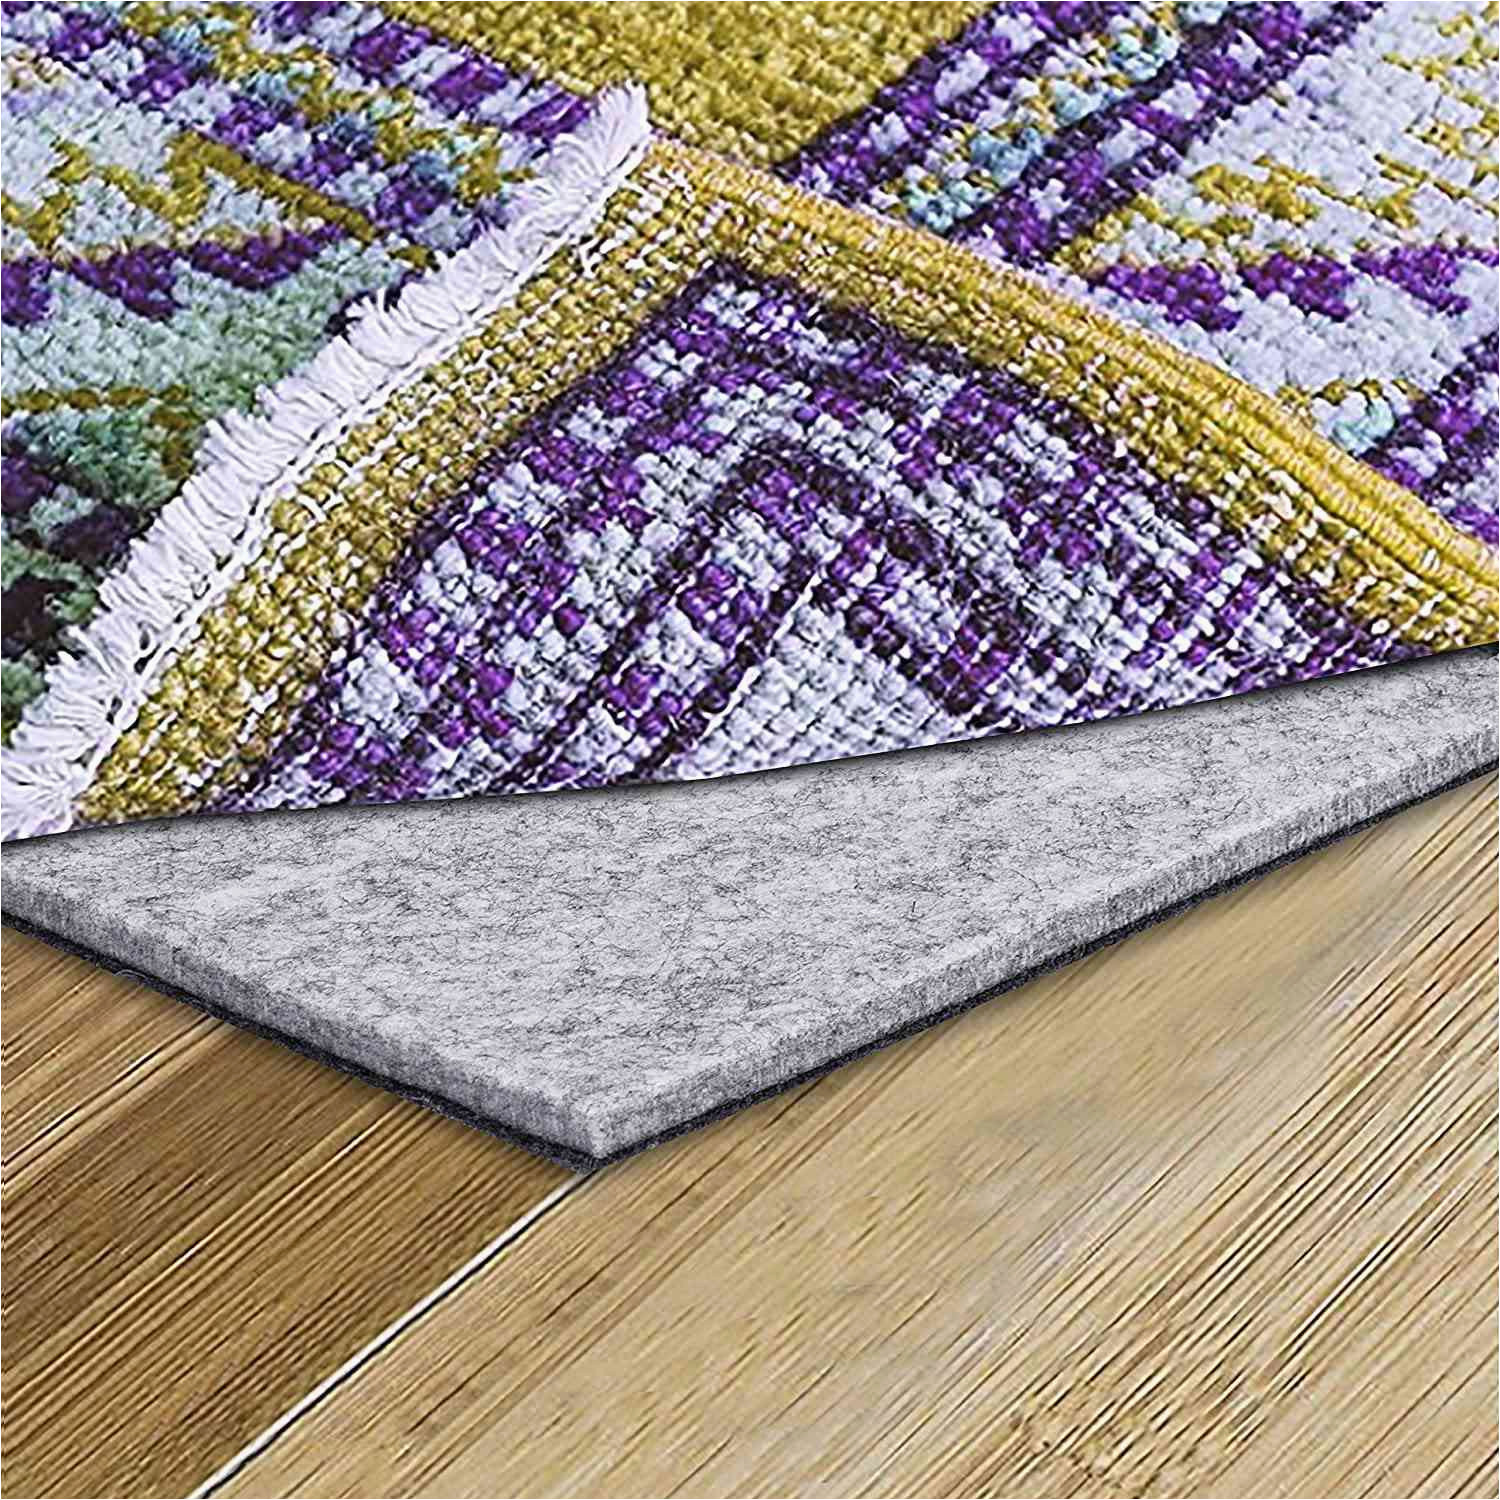 Best area Rug Pad for Hardwood Floors the 11 Best Rug Pads Of 2022 Tested by the Spruce